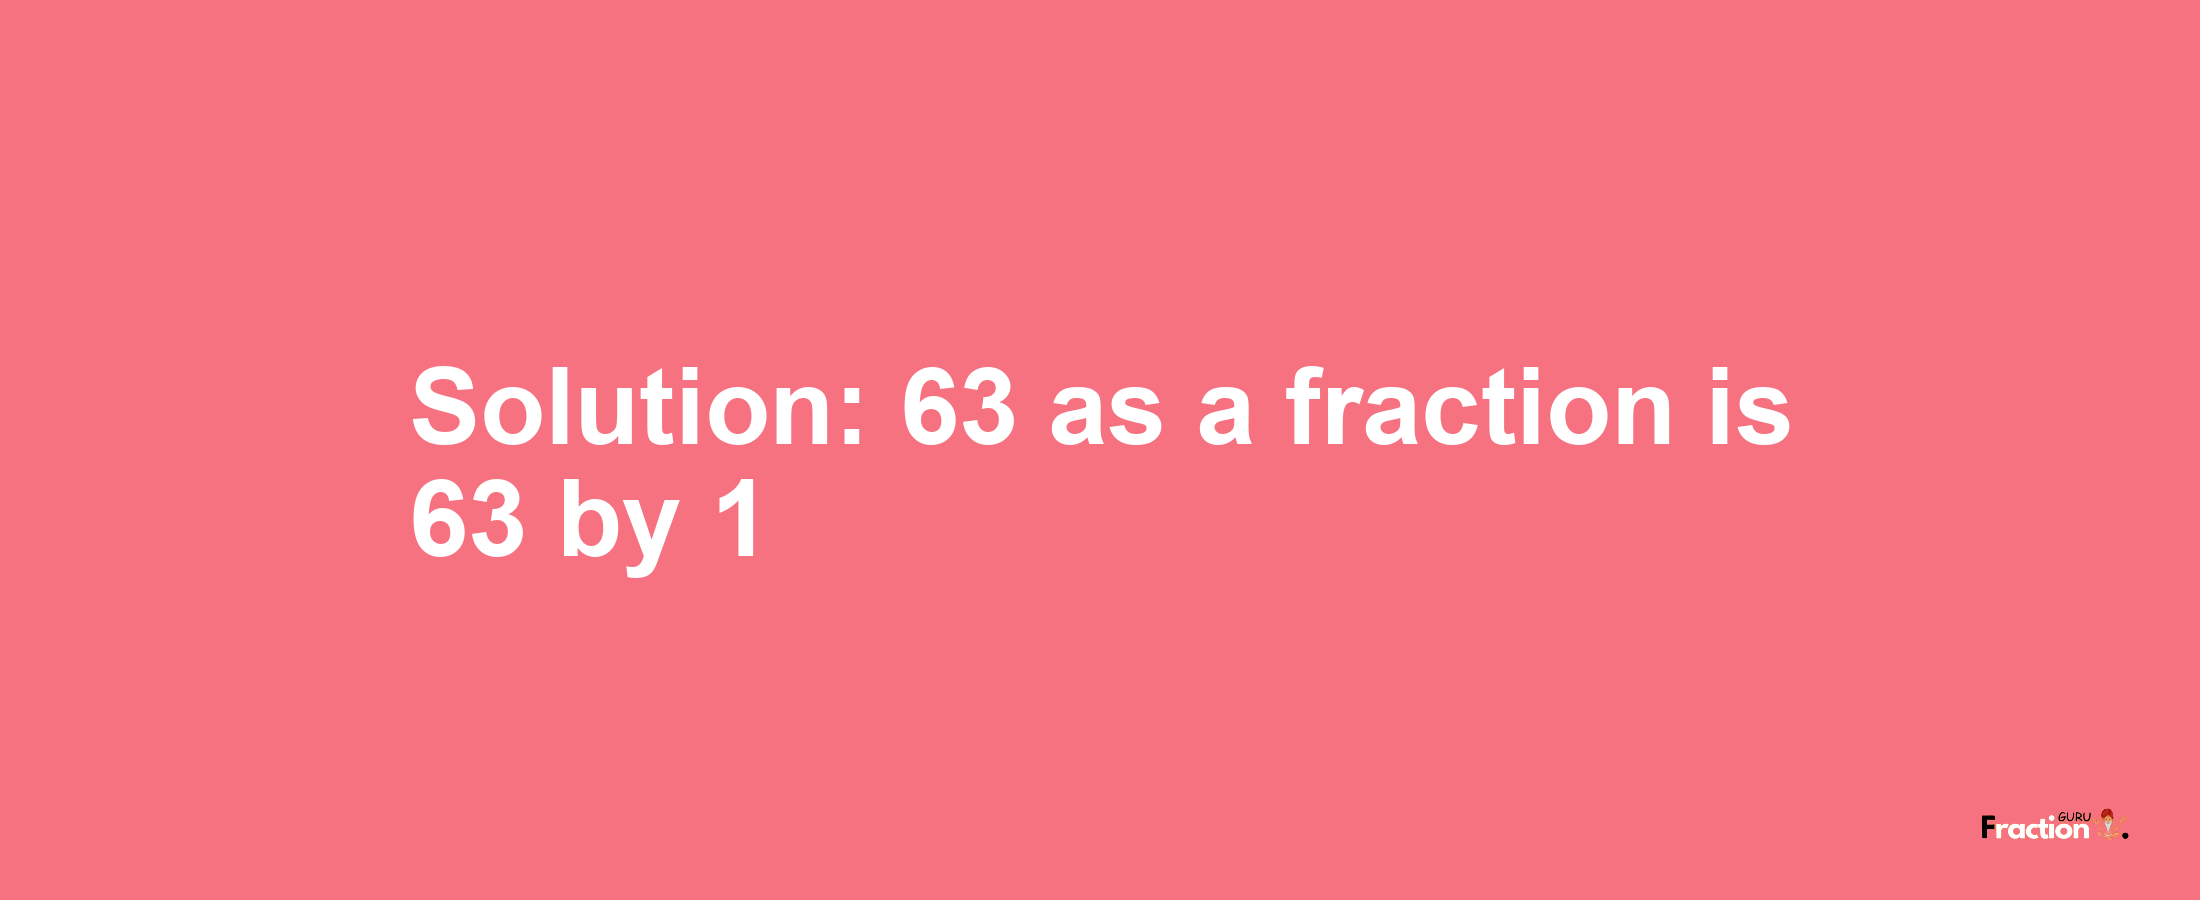 Solution:63 as a fraction is 63/1